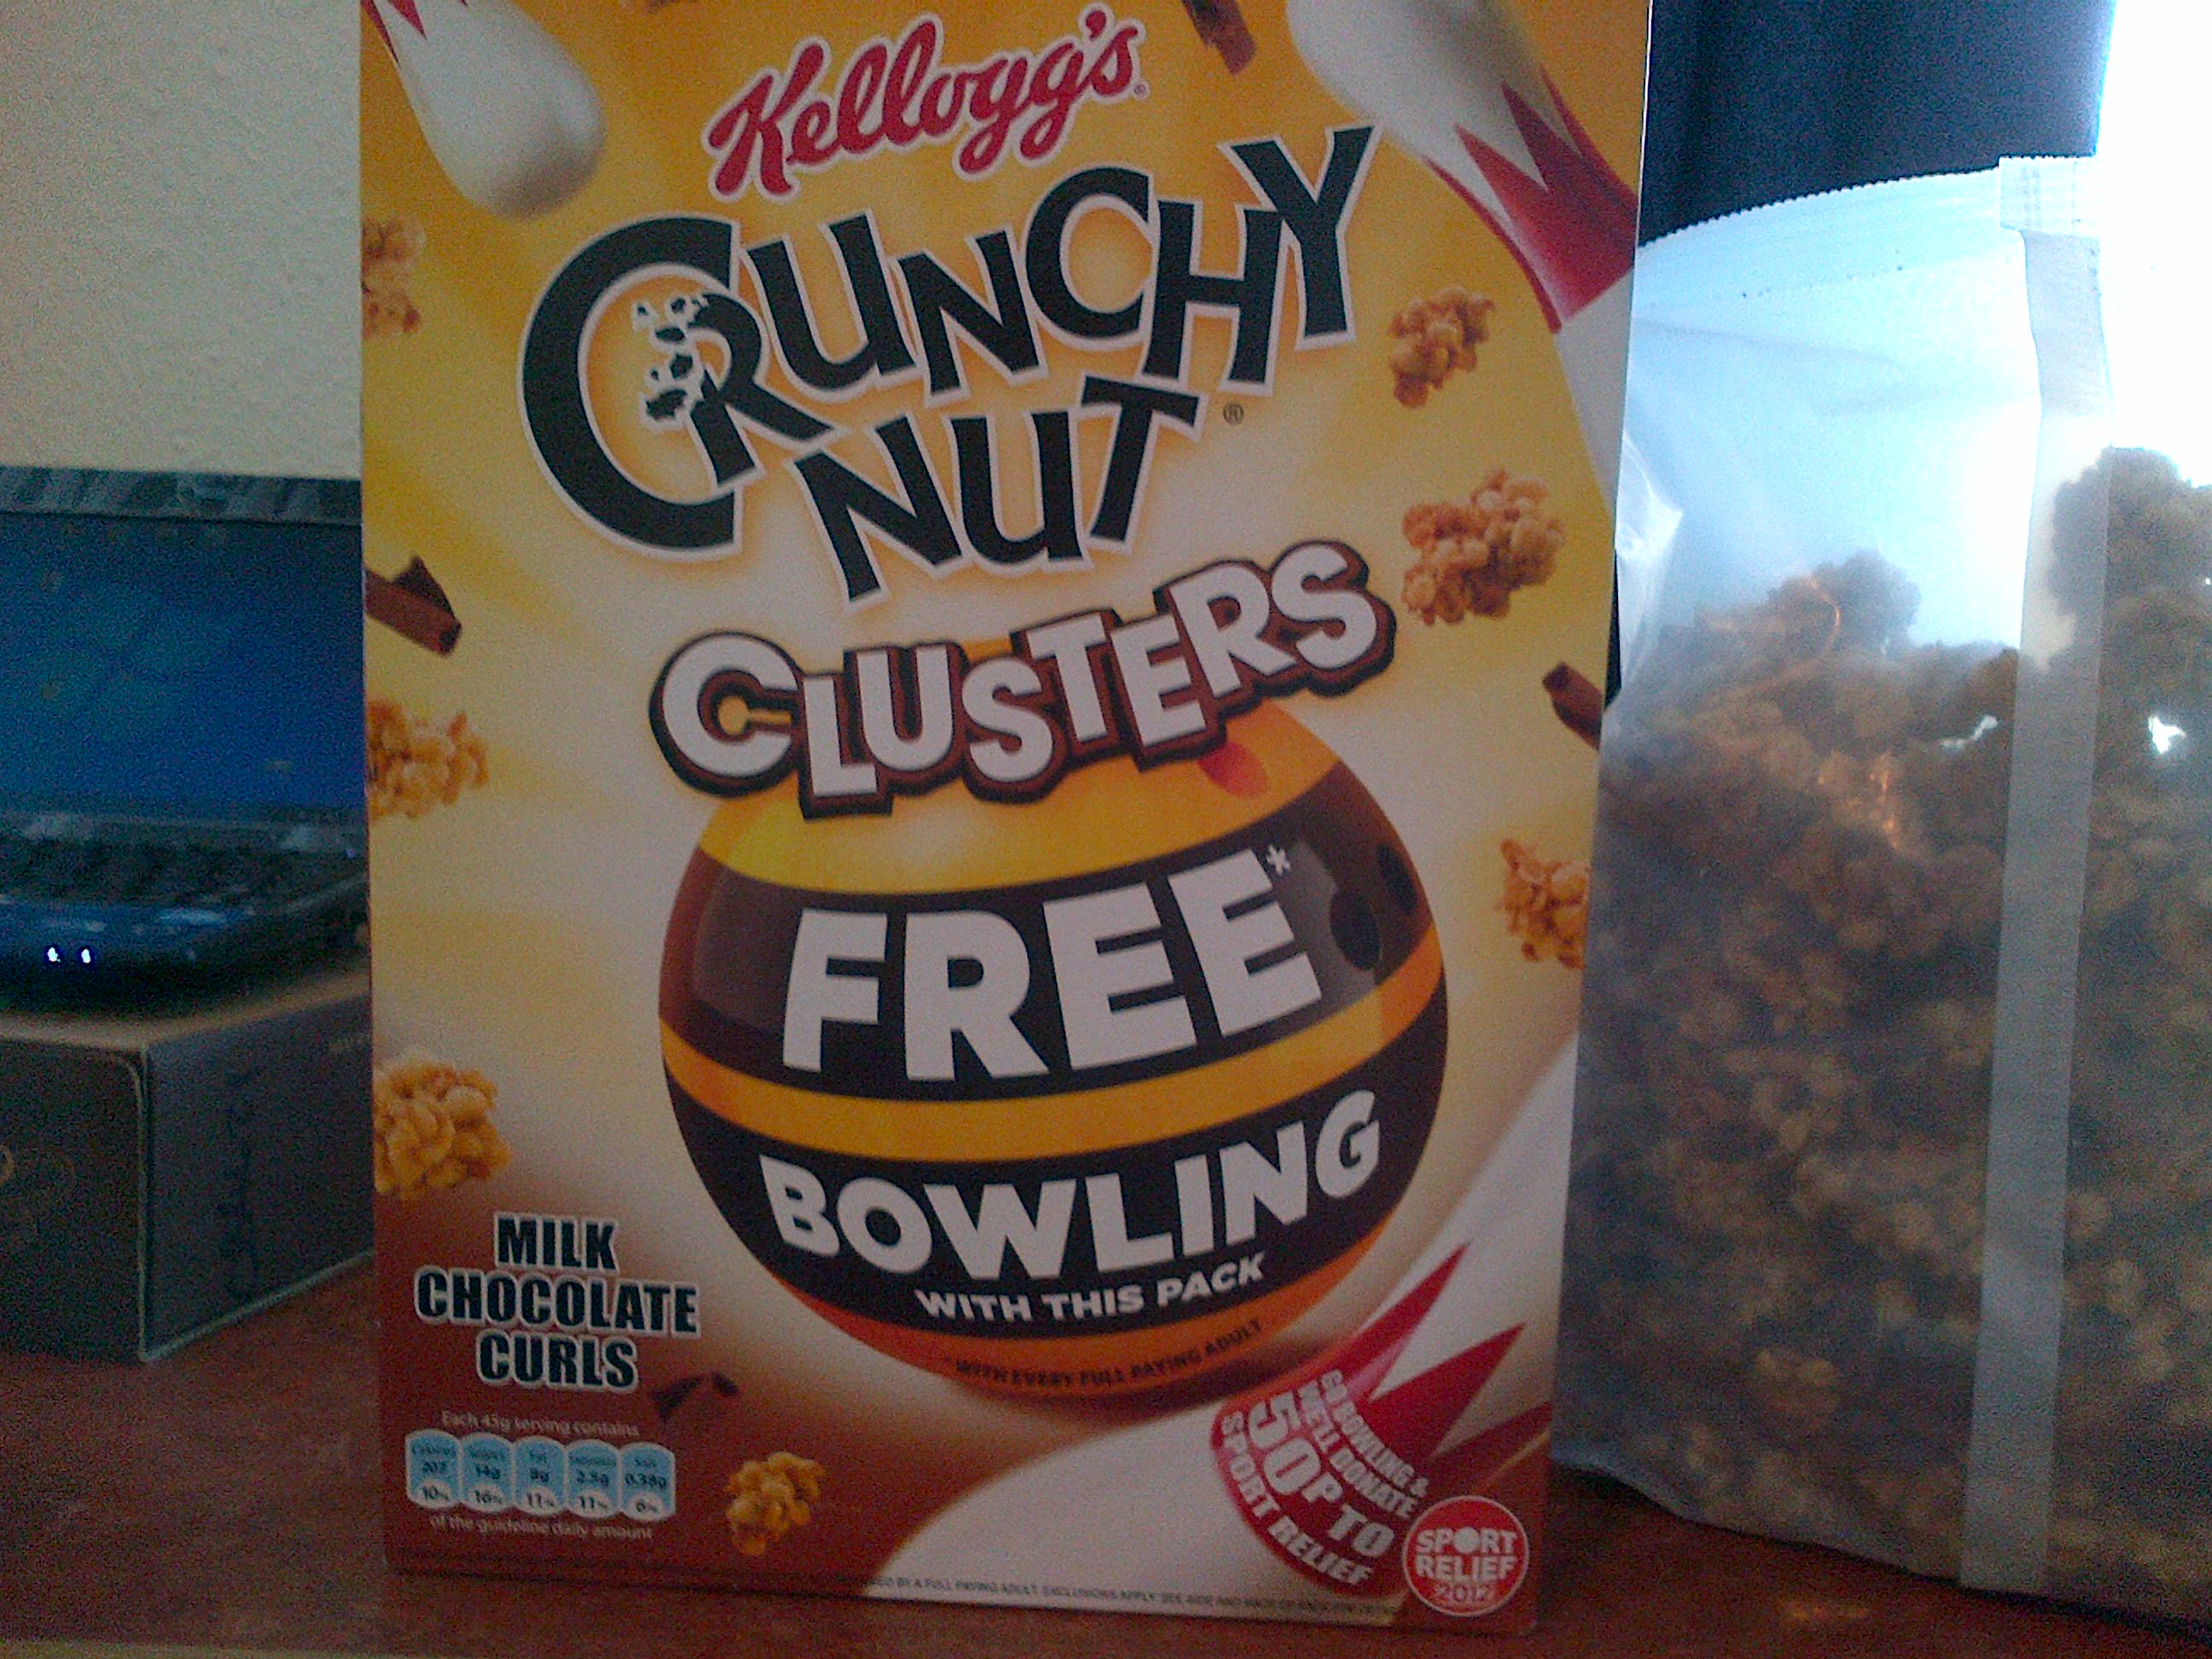 Kellogg's Crunchy Nut Clusters Milk Chocolate Curls Review